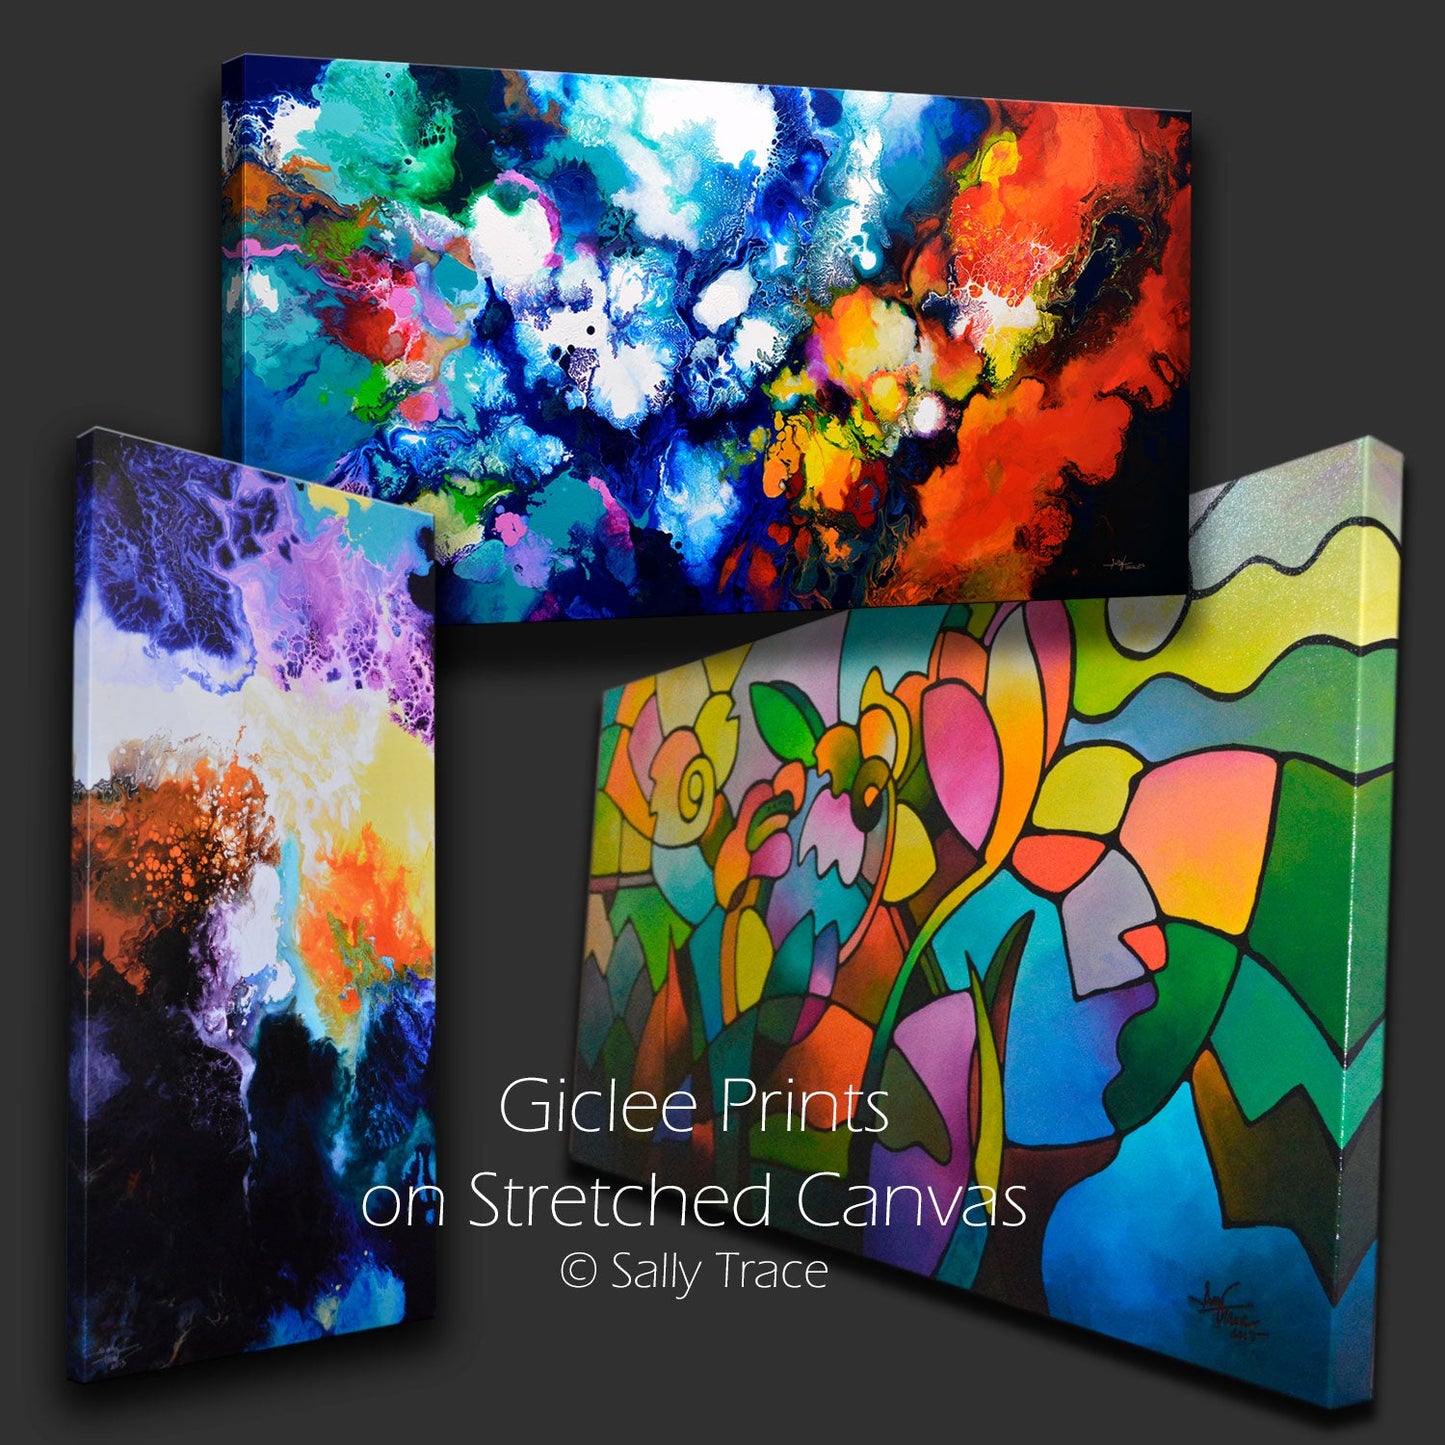 Giclee prints on stretched canvas by sally trace